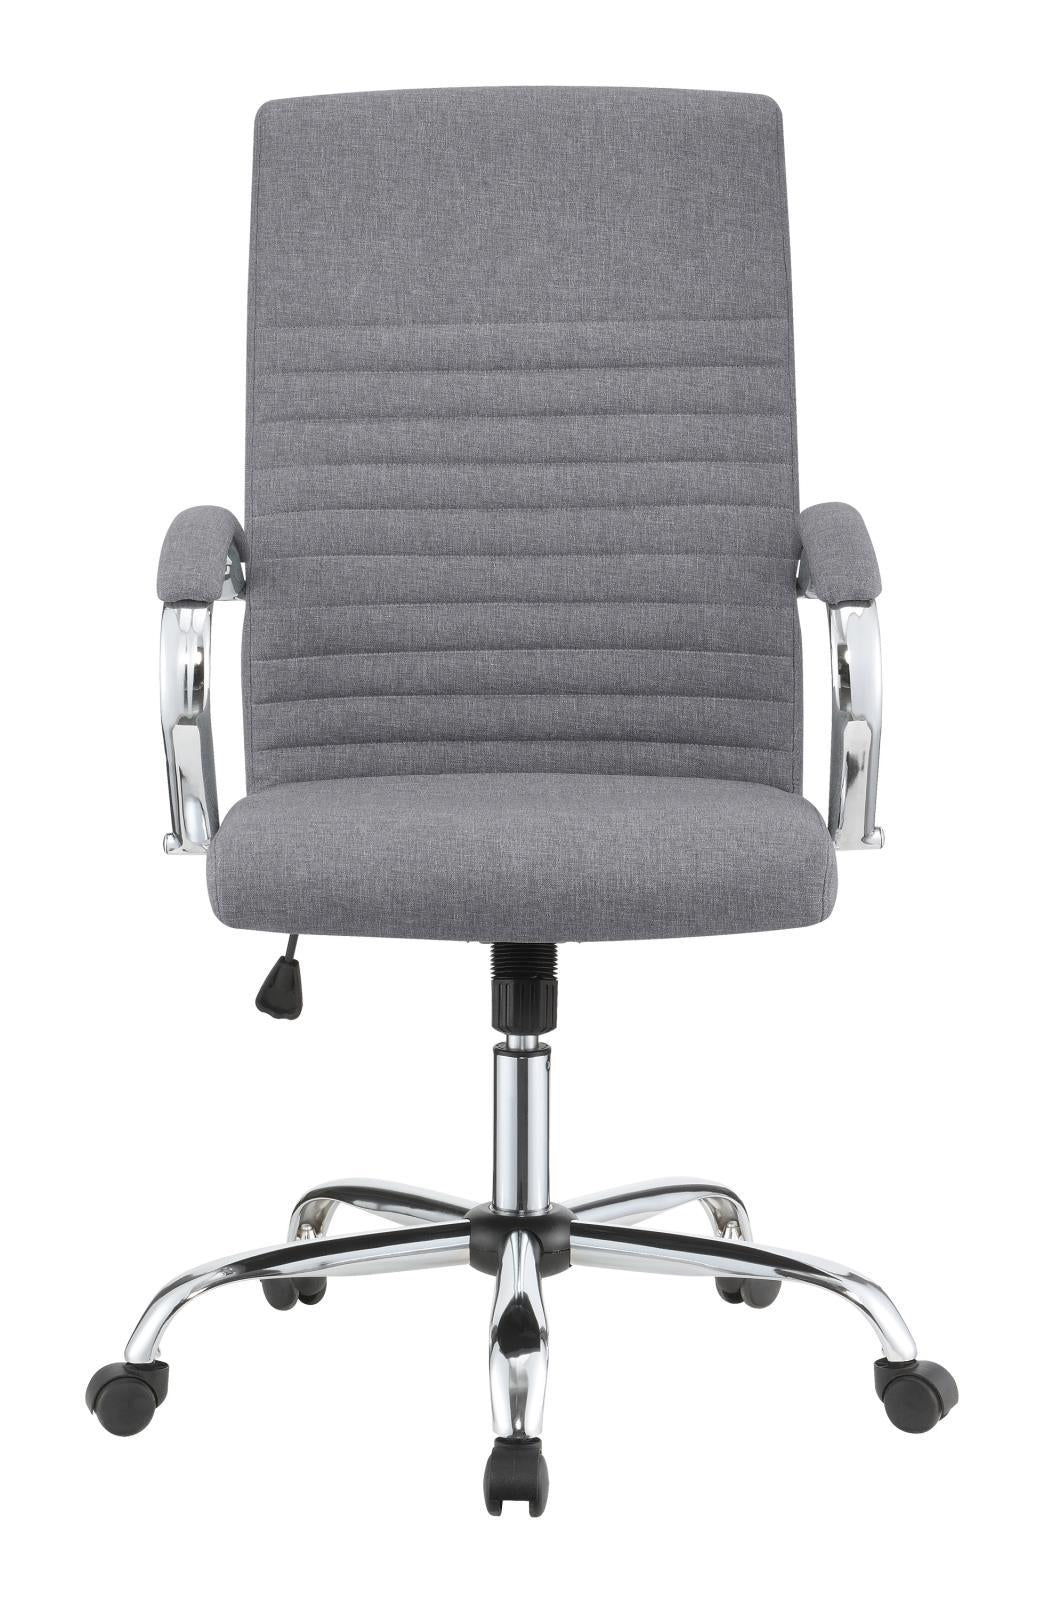 Abisko Upholstered Office Chair with Casters Grey and Chrome Abisko Upholstered Office Chair with Casters Grey and Chrome Half Price Furniture